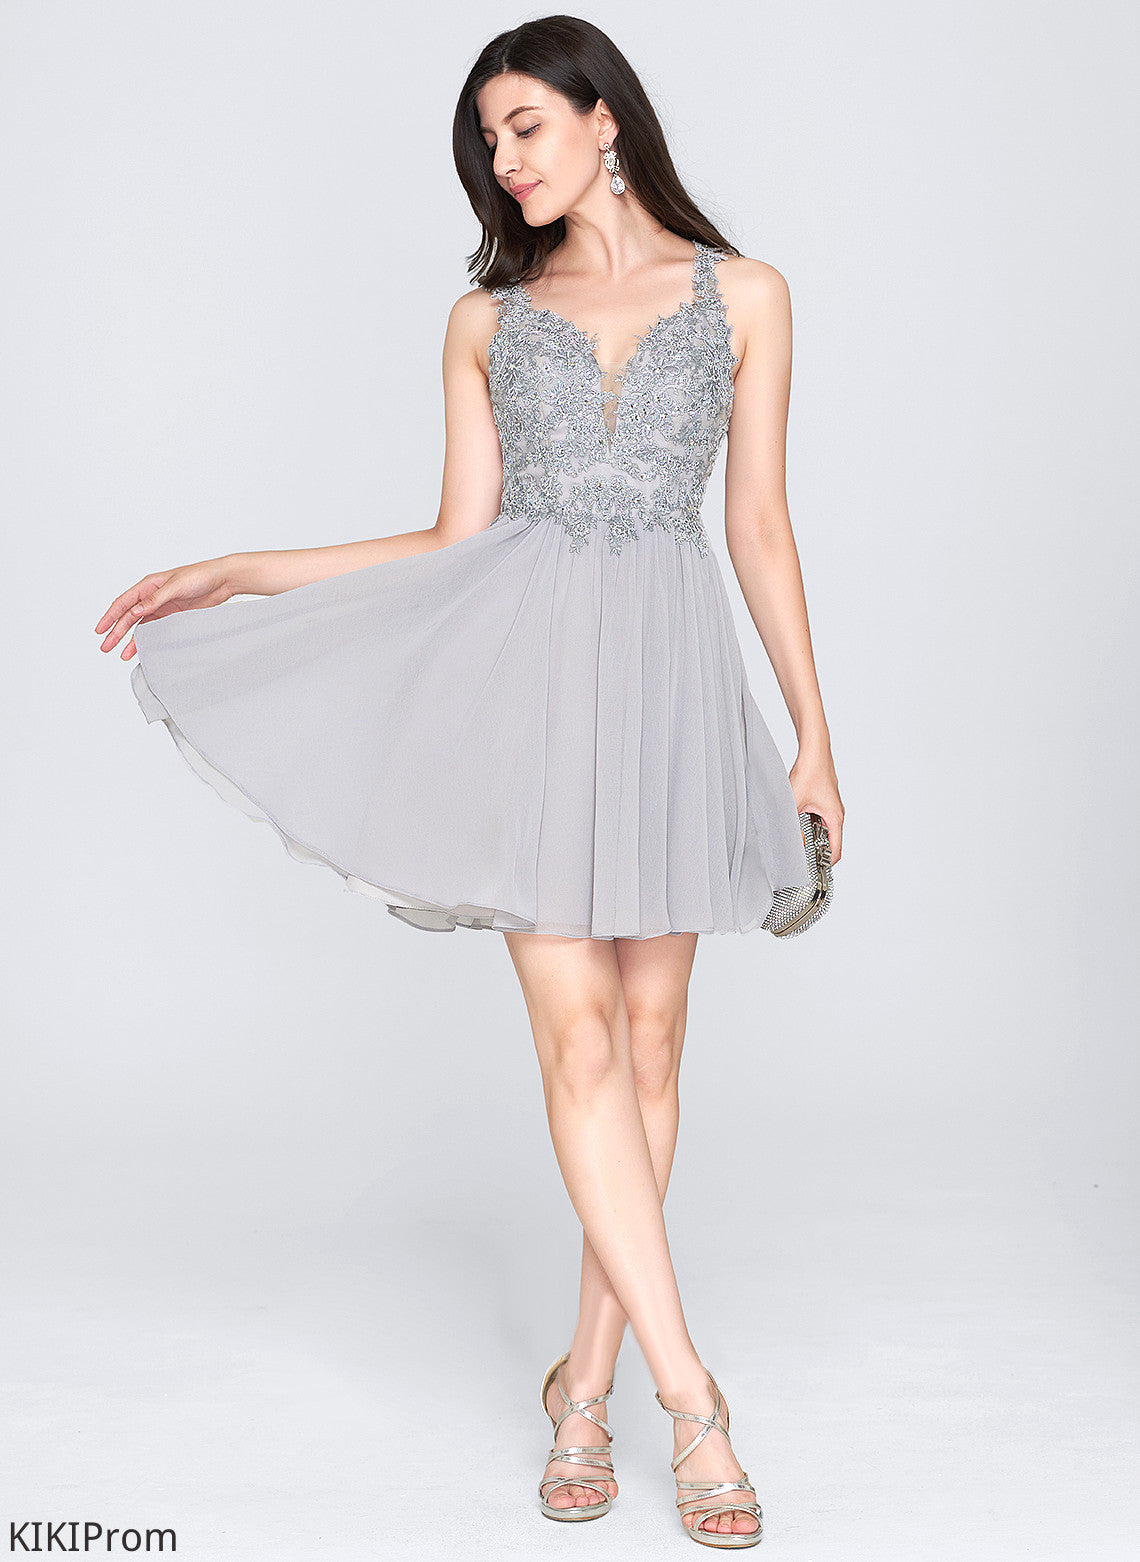 A-Line Homecoming Dresses Sweetheart Sequins Short/Mini Lace Dress Chiffon Homecoming With Beading Alyson